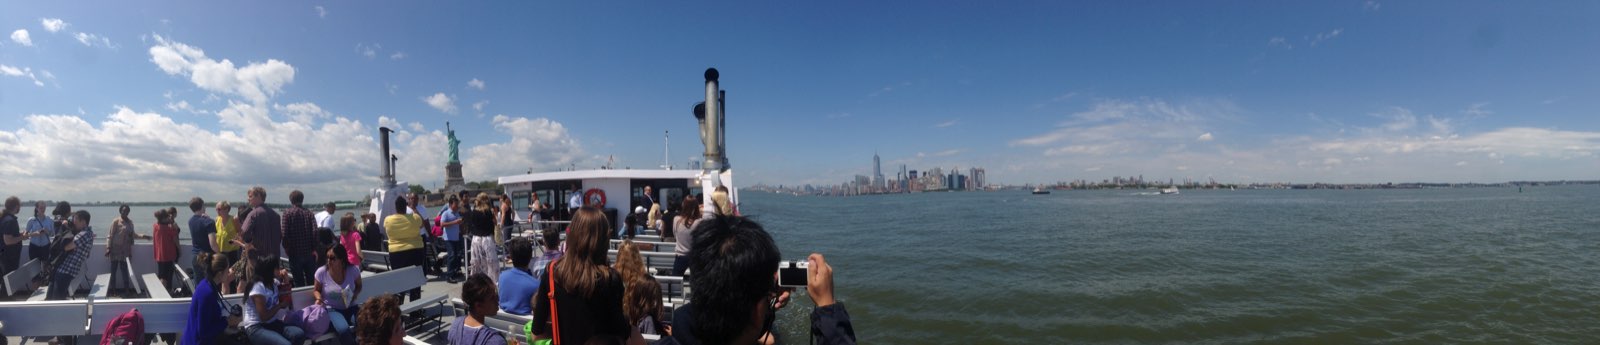 NYC and Statue of Liberty panorama